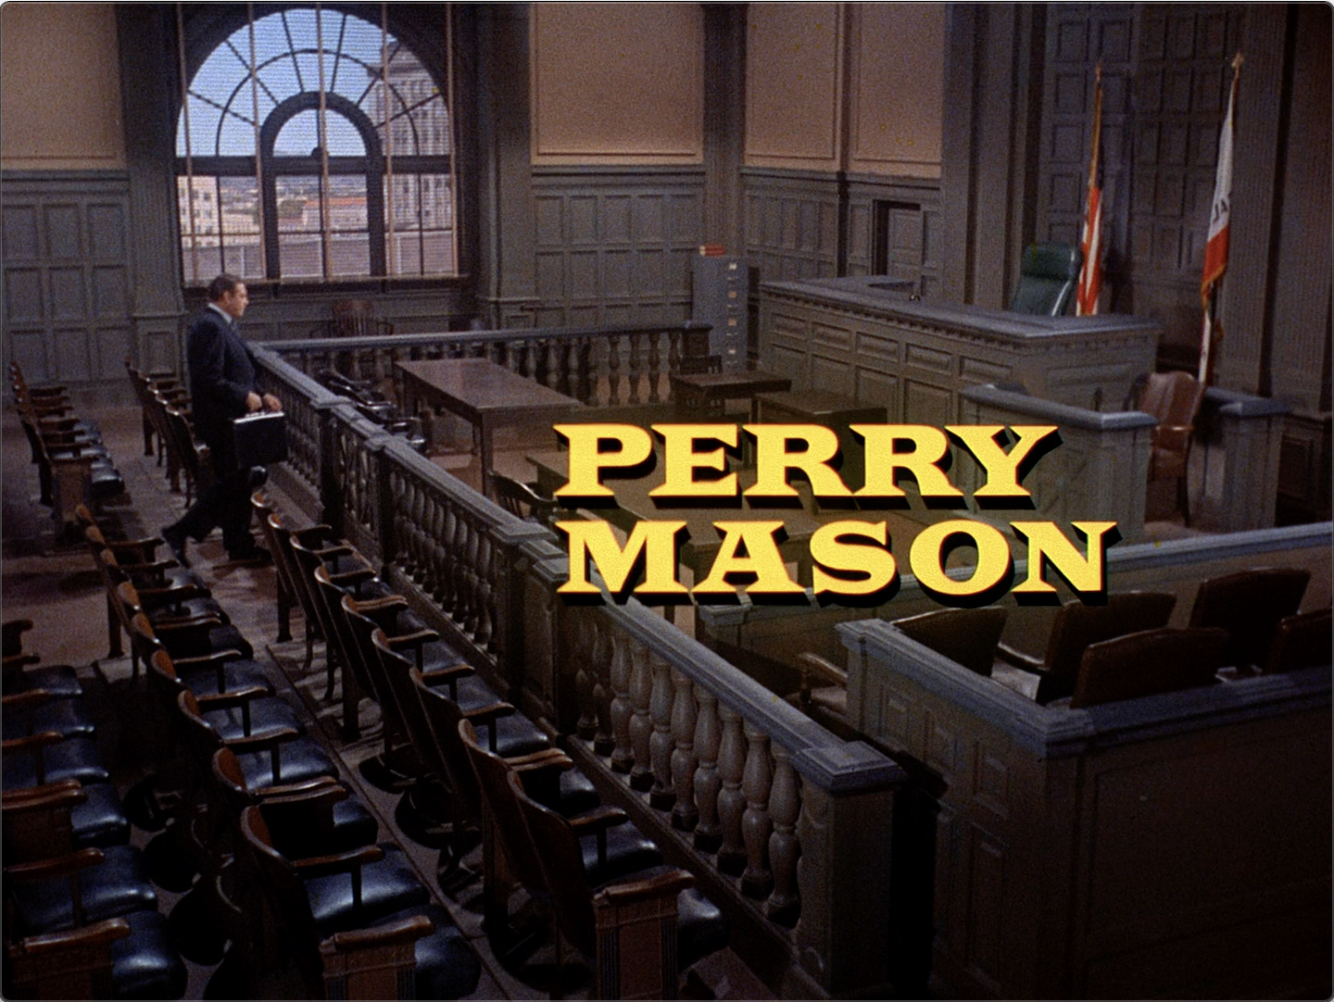 Perry Mason S09E21 The Case of the Twice-Told Twist (Sep.27.1966)-2.jpg